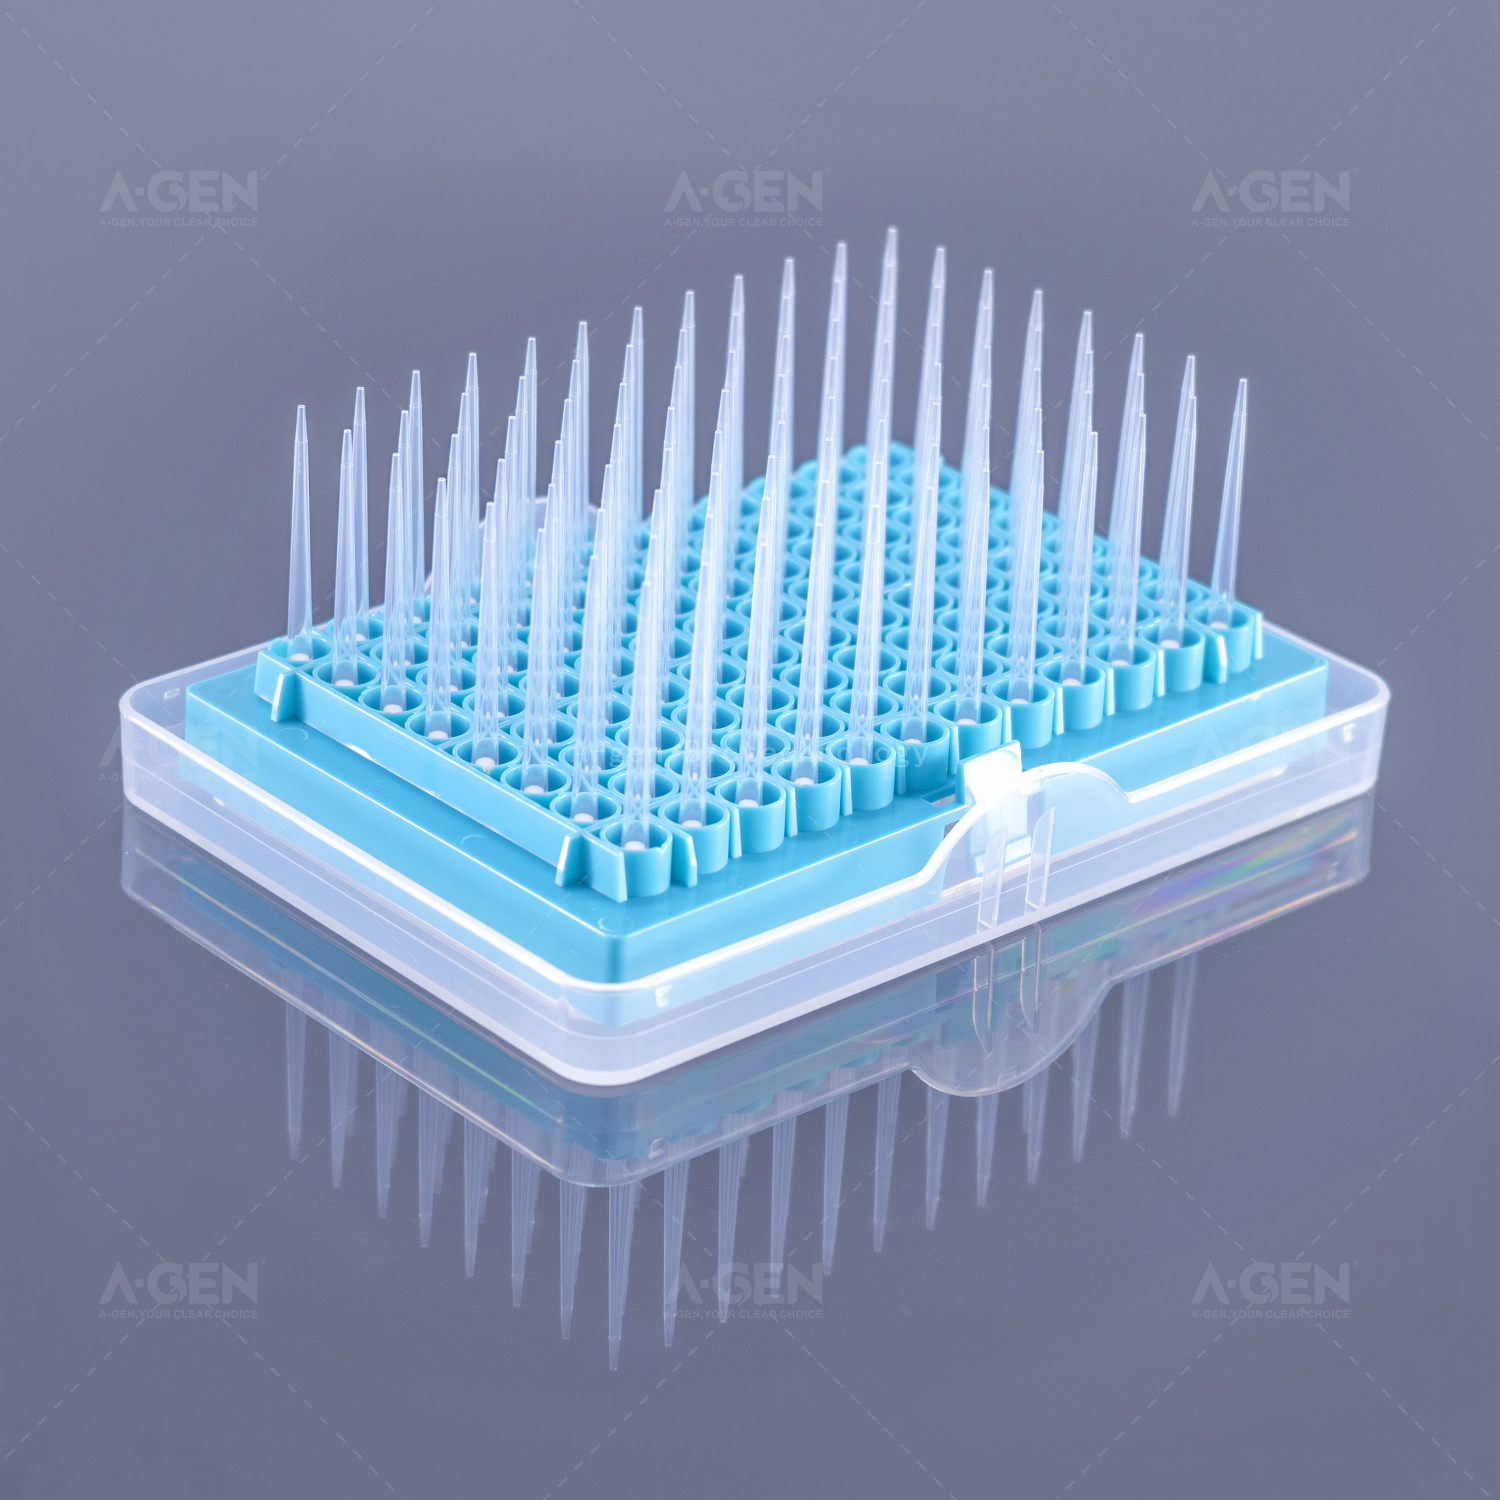 Low Retention Hamilton Pipette Tip 50μL Sterile Clear PP Pipette Tip in Rack for Liquid Transfer With Filter 